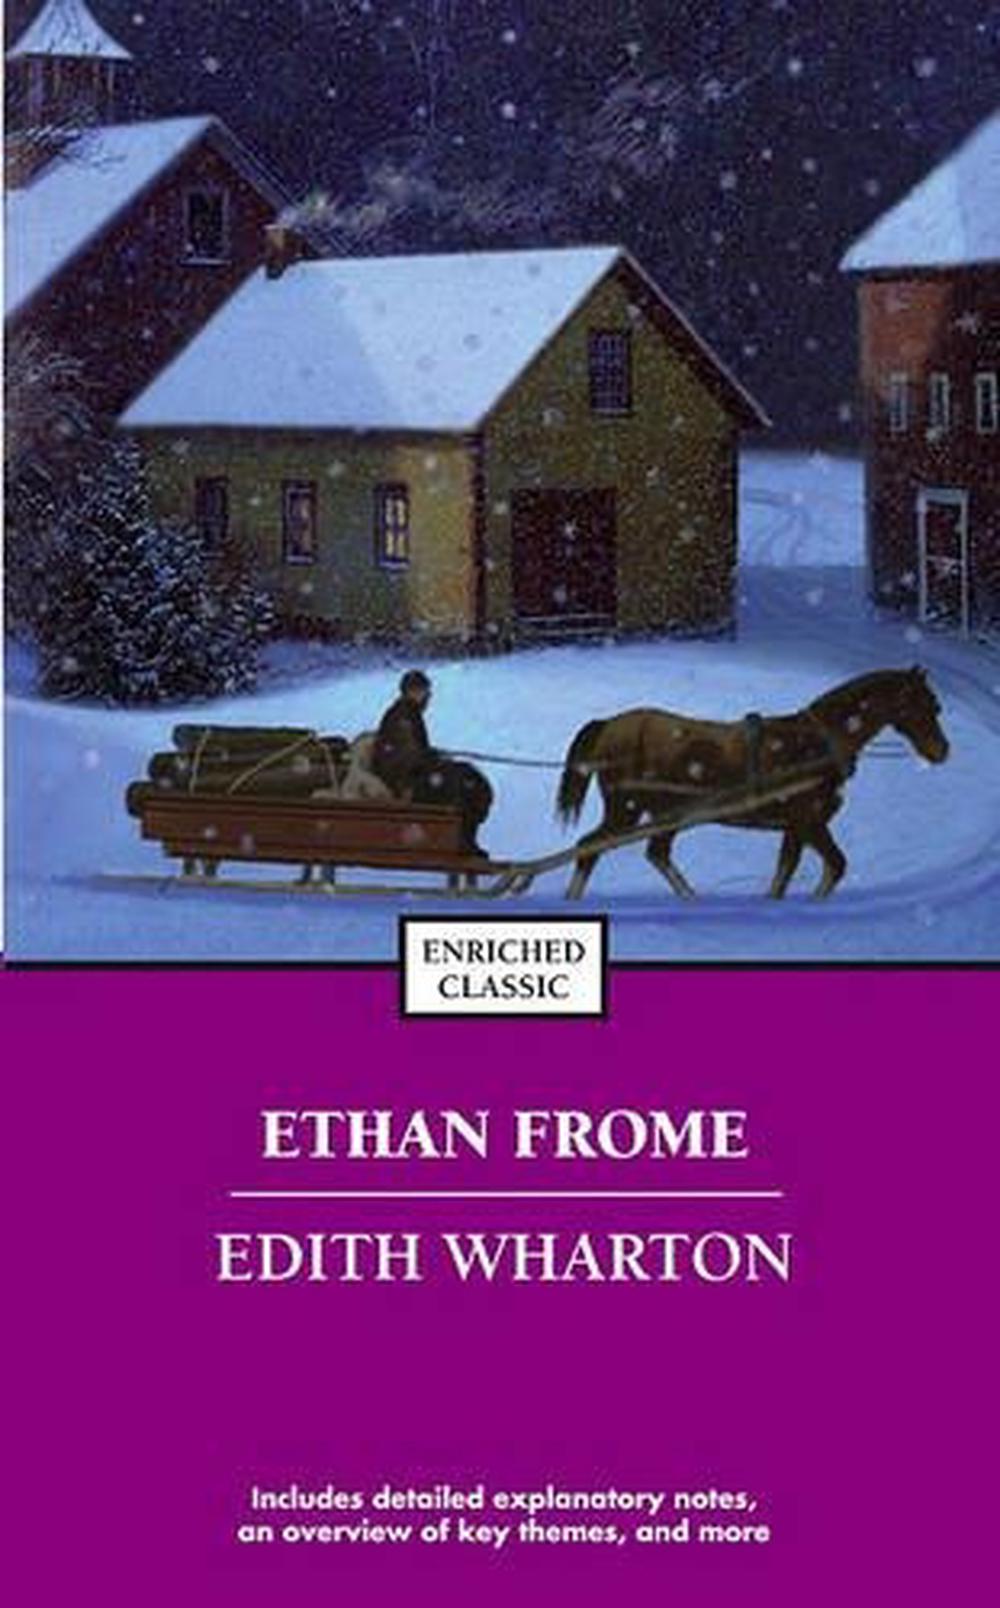 ethan frome author